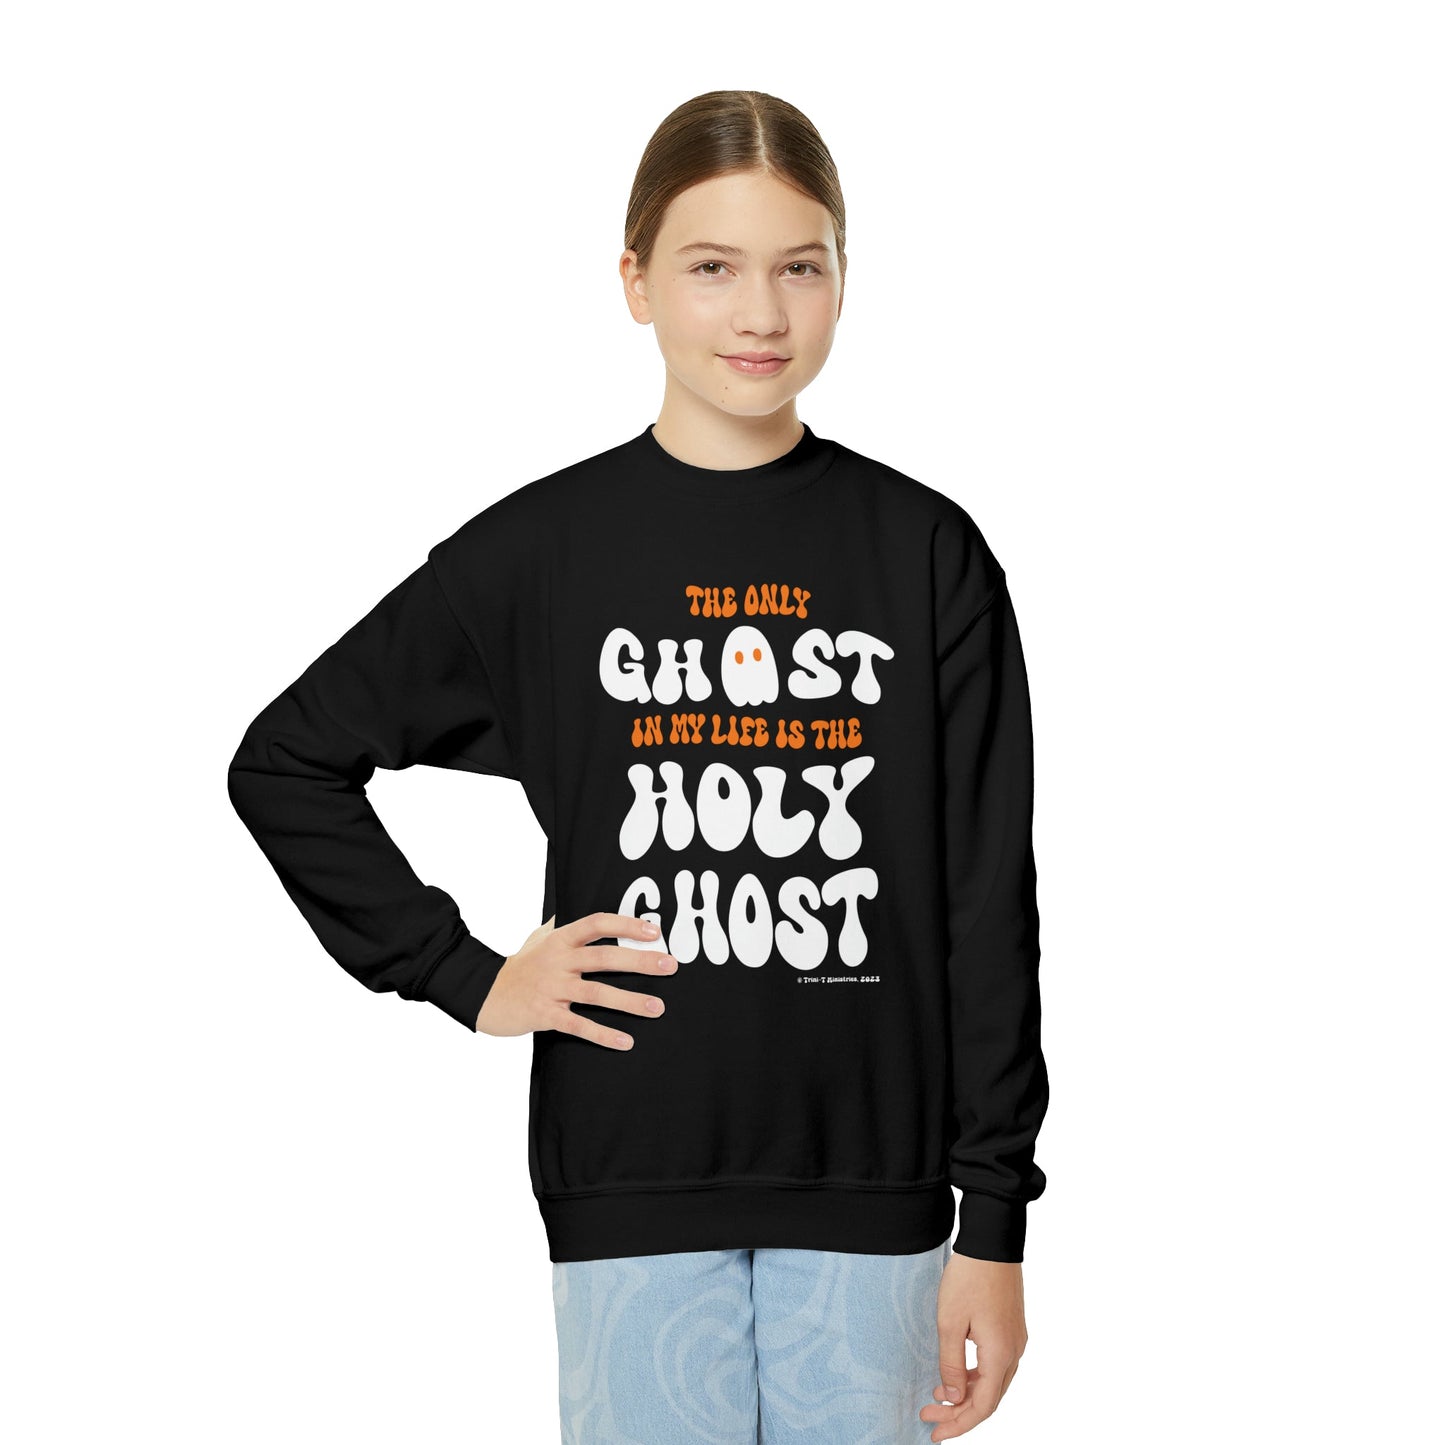 Only Holy Ghost - Kid's Sweatshirt - Trini-T Ministries